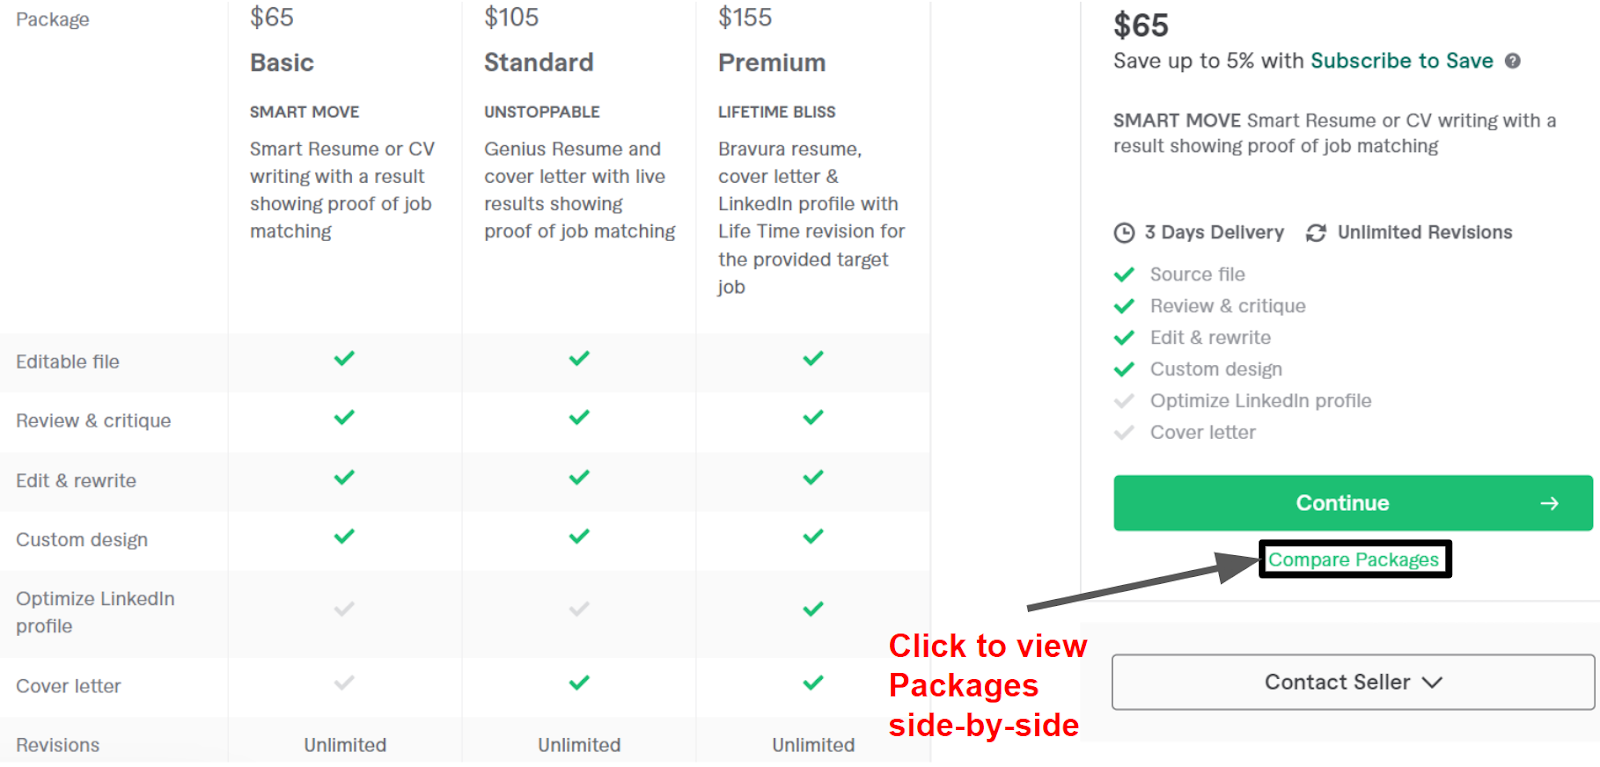 comparing a gig's Packages on Fiverr